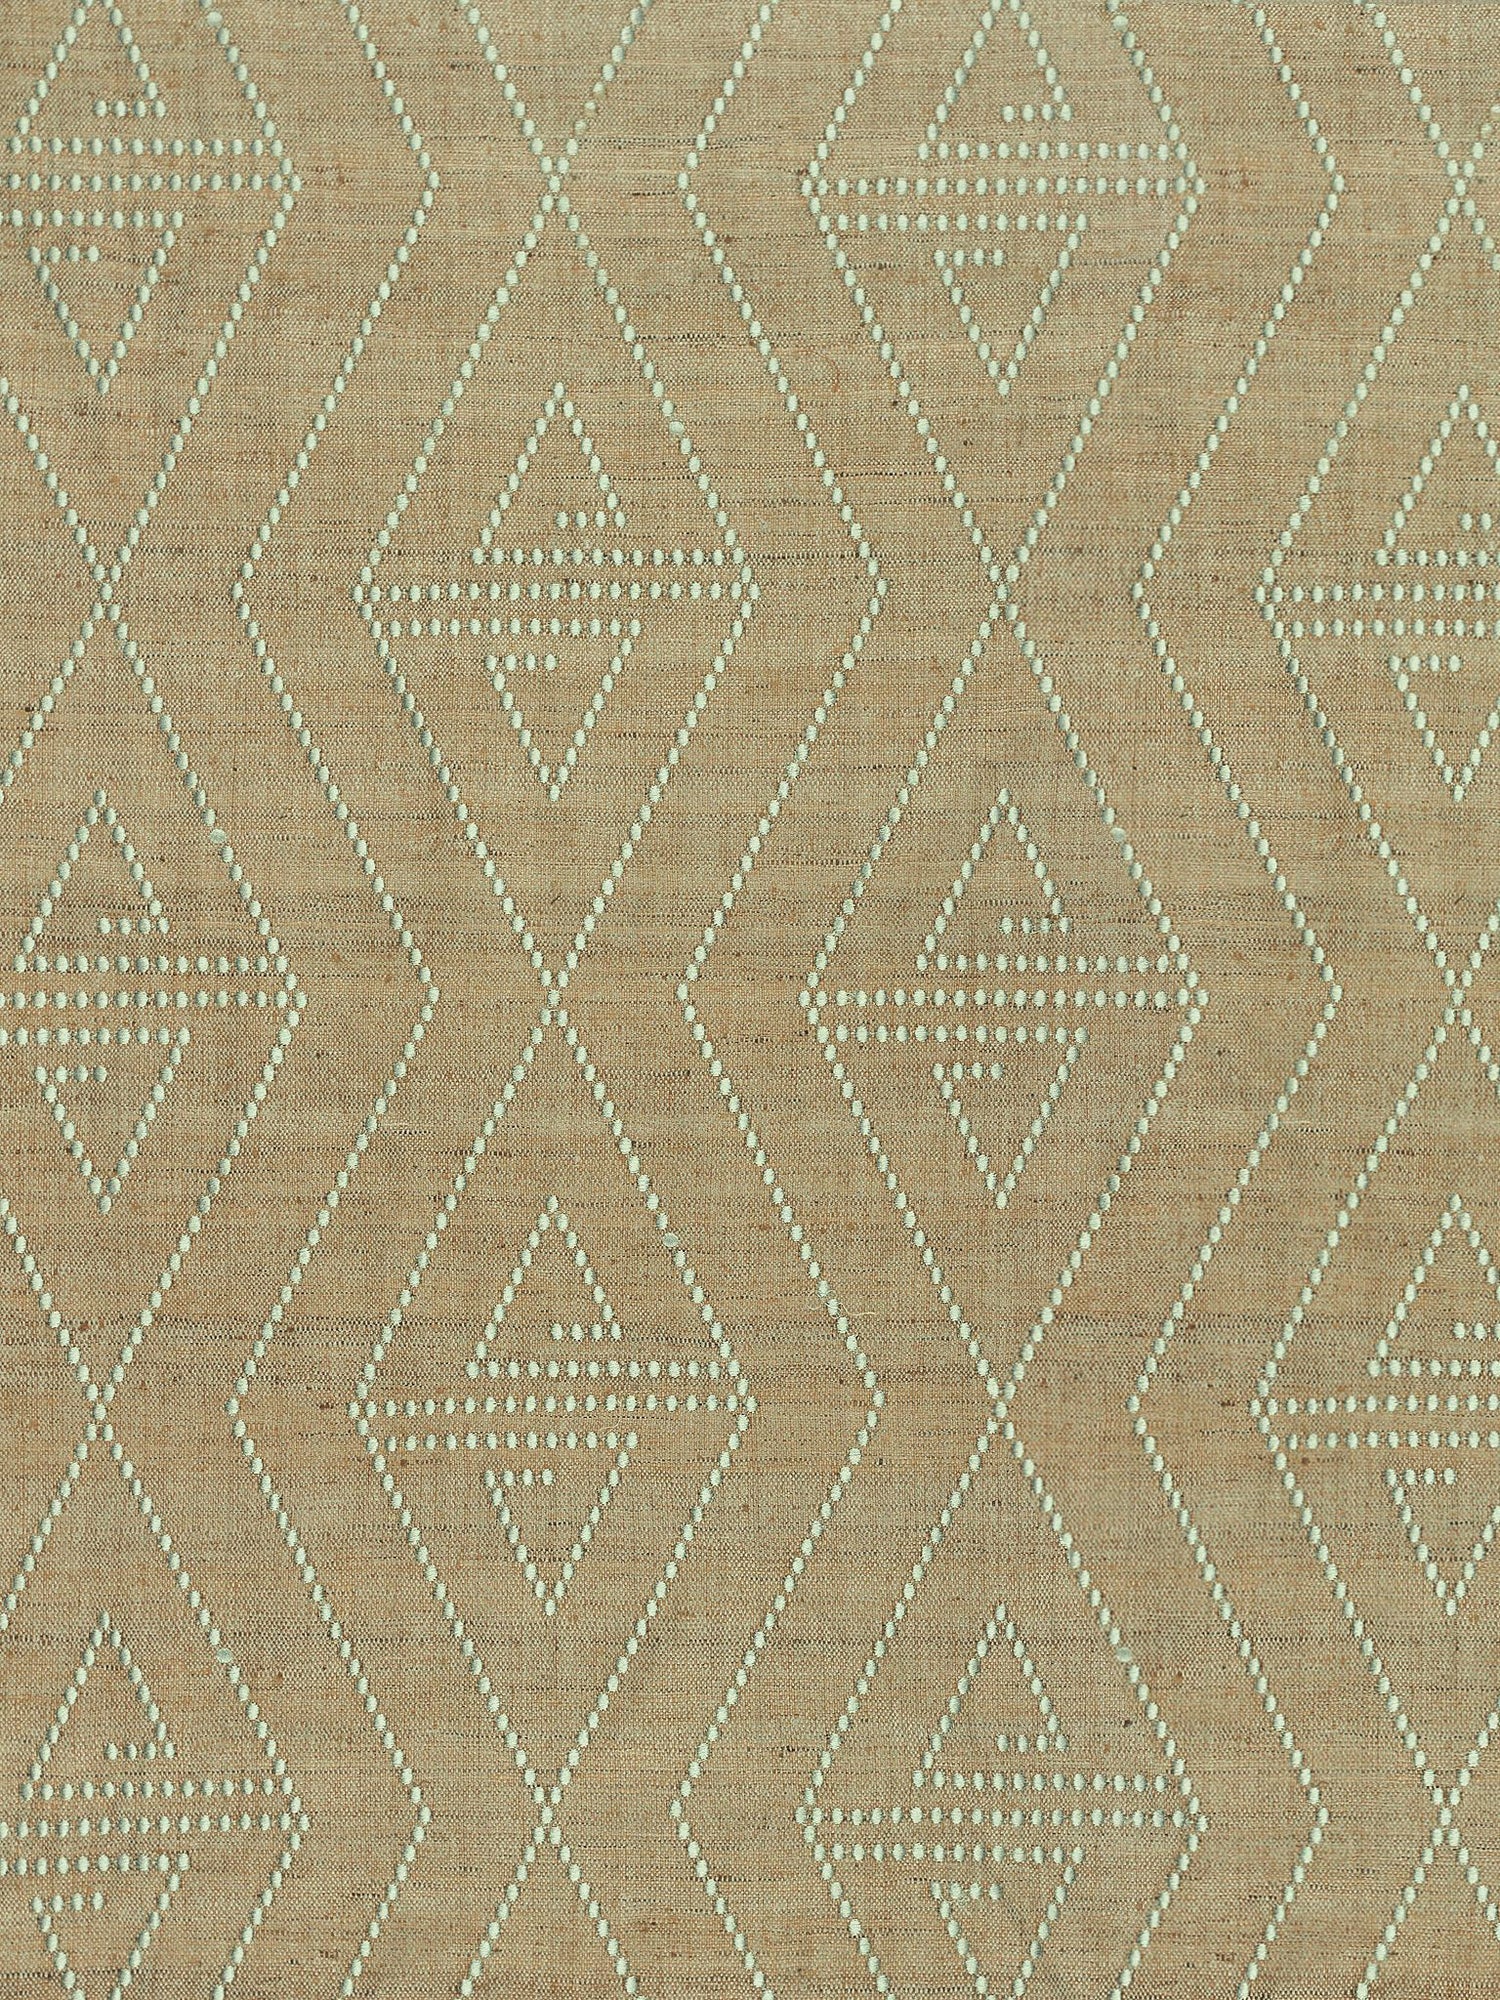 Torquay fabric in celadon color - pattern number ZS 00138068 - by Scalamandre in the Old World Weavers collection